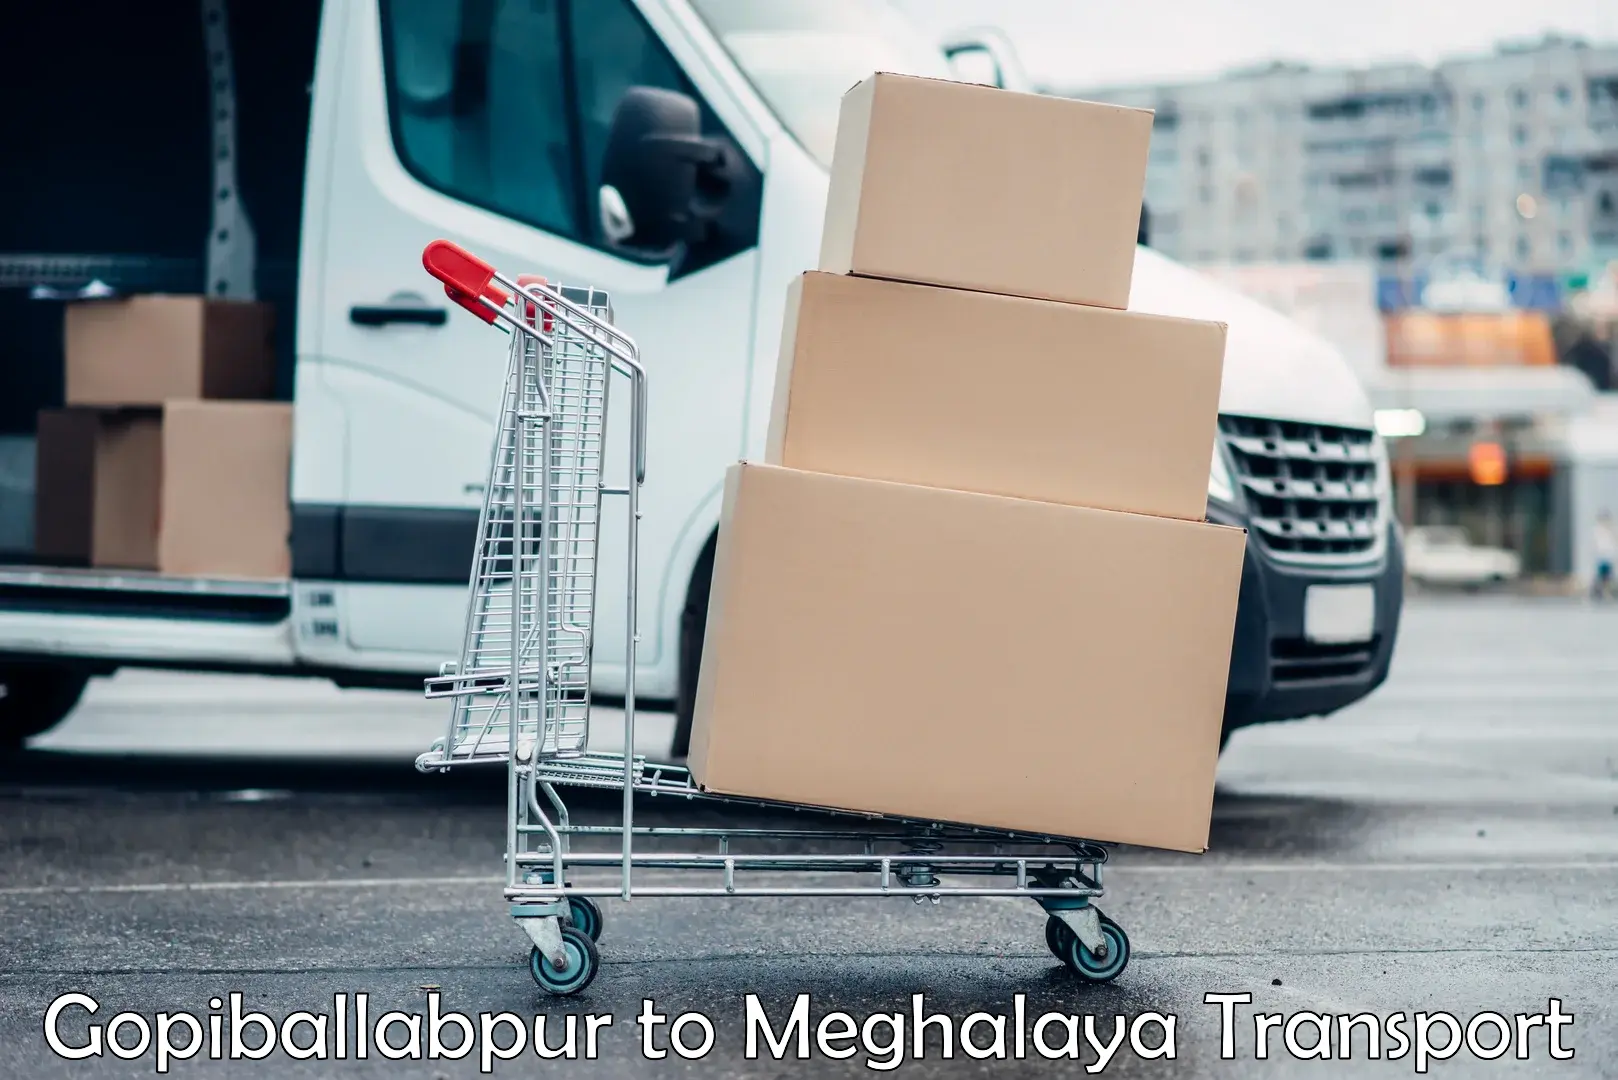 Material transport services Gopiballabpur to Nongpoh